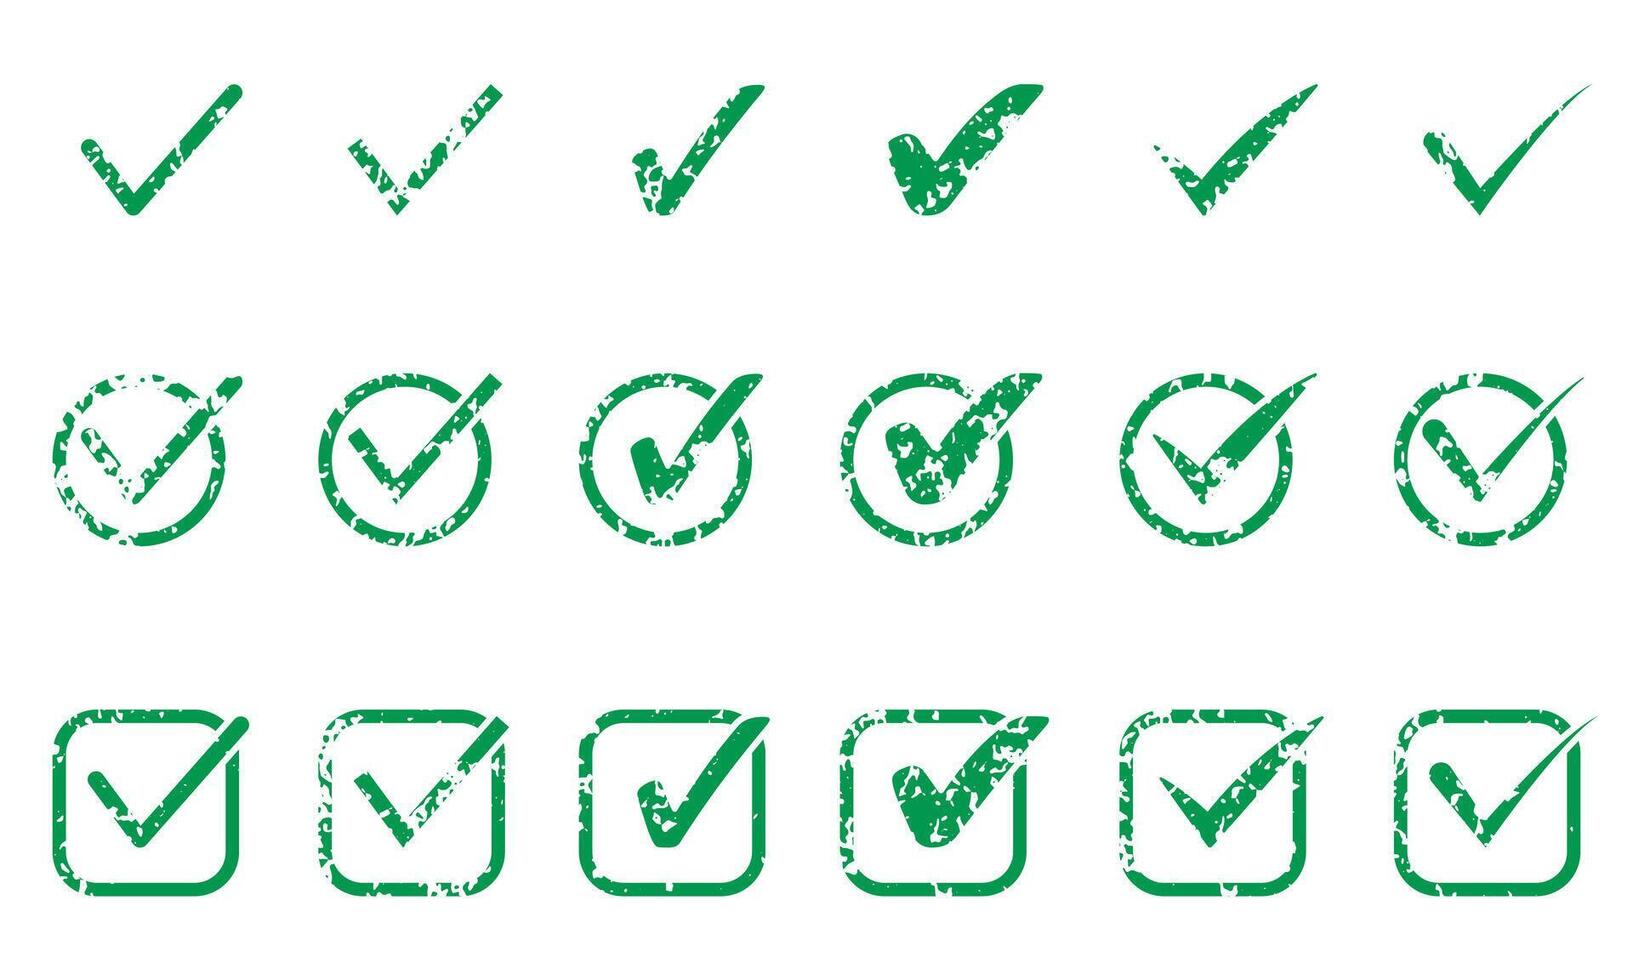 Check Mark Green Icon Set. Ok Sign, Grunge Checkmark In Checkbox Pictogram. Correct Rubber Stamp, Right Choice Symbol Collection. Vote, Confirm, Accept Tick. Isolated Vector Illustration